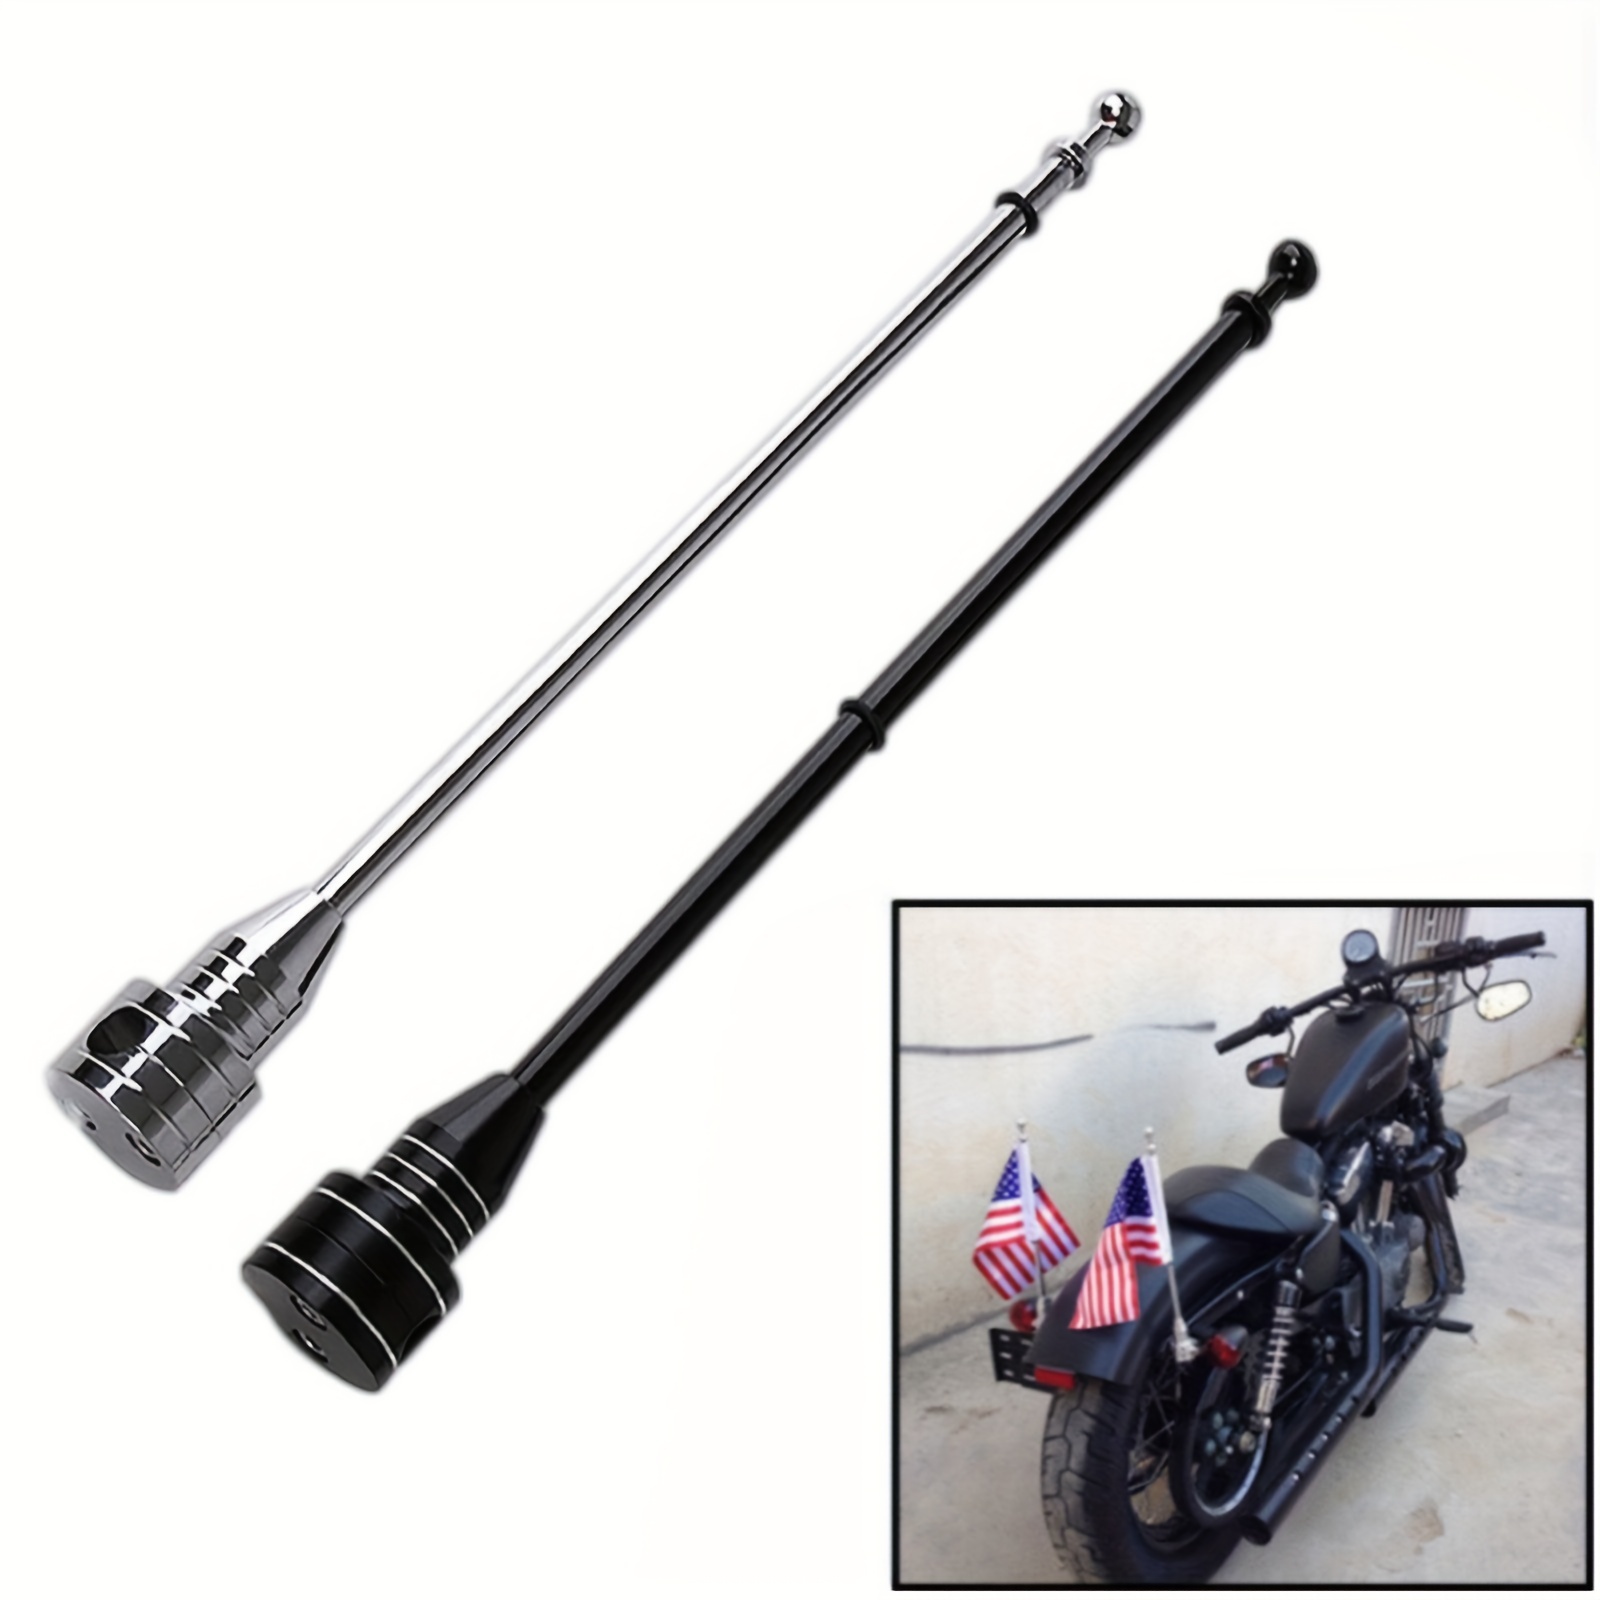 Rowdy Baggers, order now and get free shipping! Motorcycle Flag Pole Mount  Luggage Rack Flag Shelf With Base Adjustable For Harley Sportster XL883  Touri